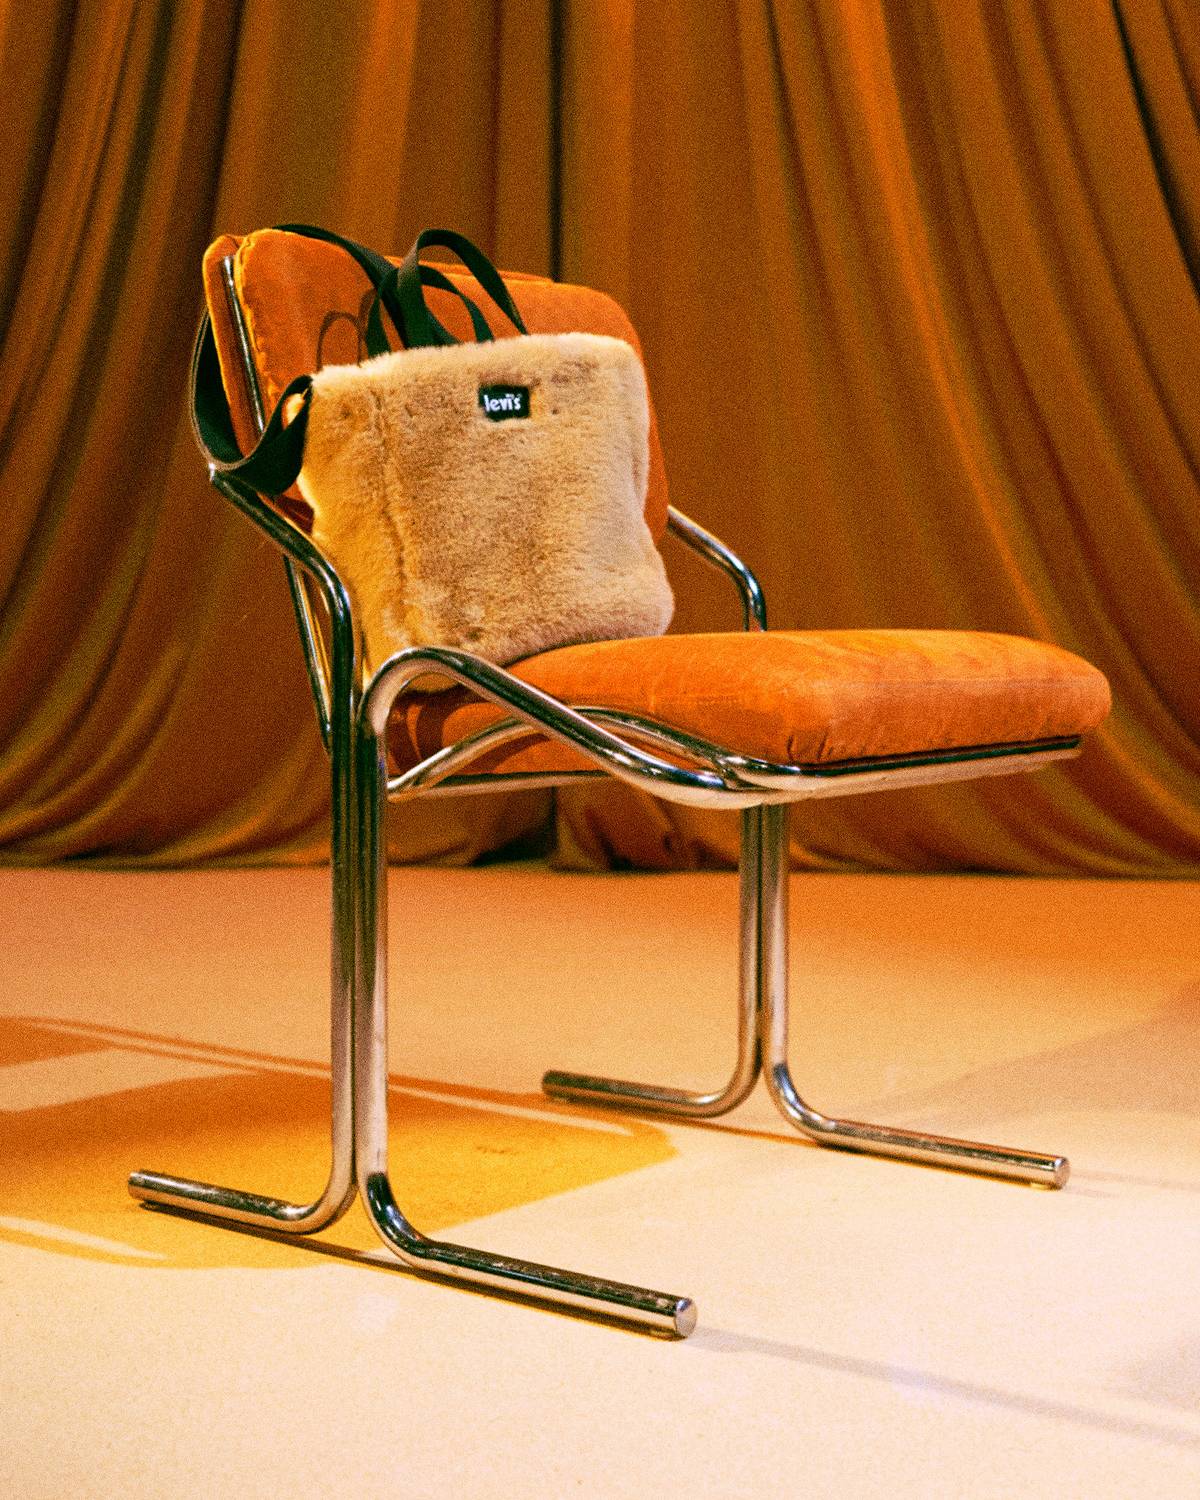 Fuzzy bag sitting on a mid century modern chair against a golden burnt orange backdrop